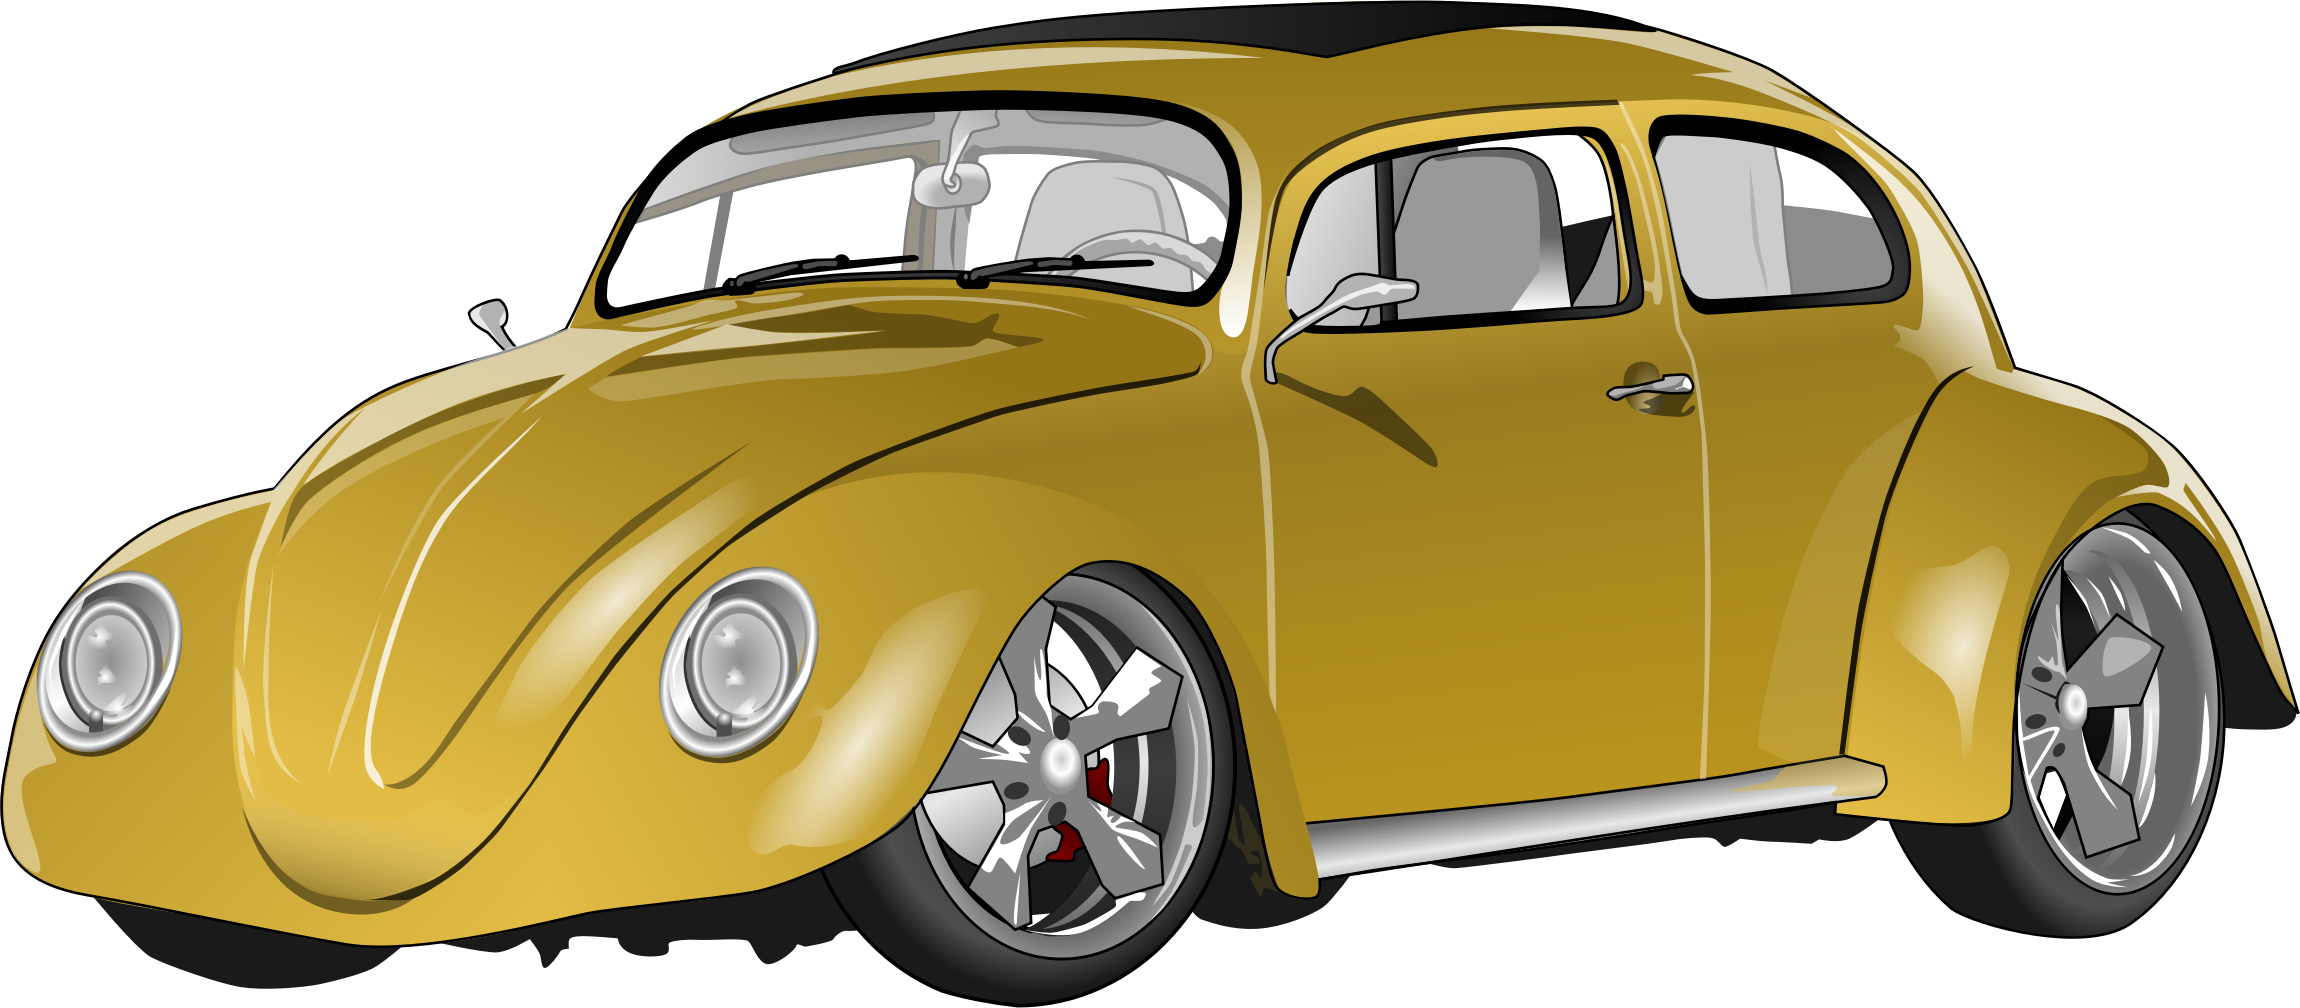 Vw beetle clipart - Clipground